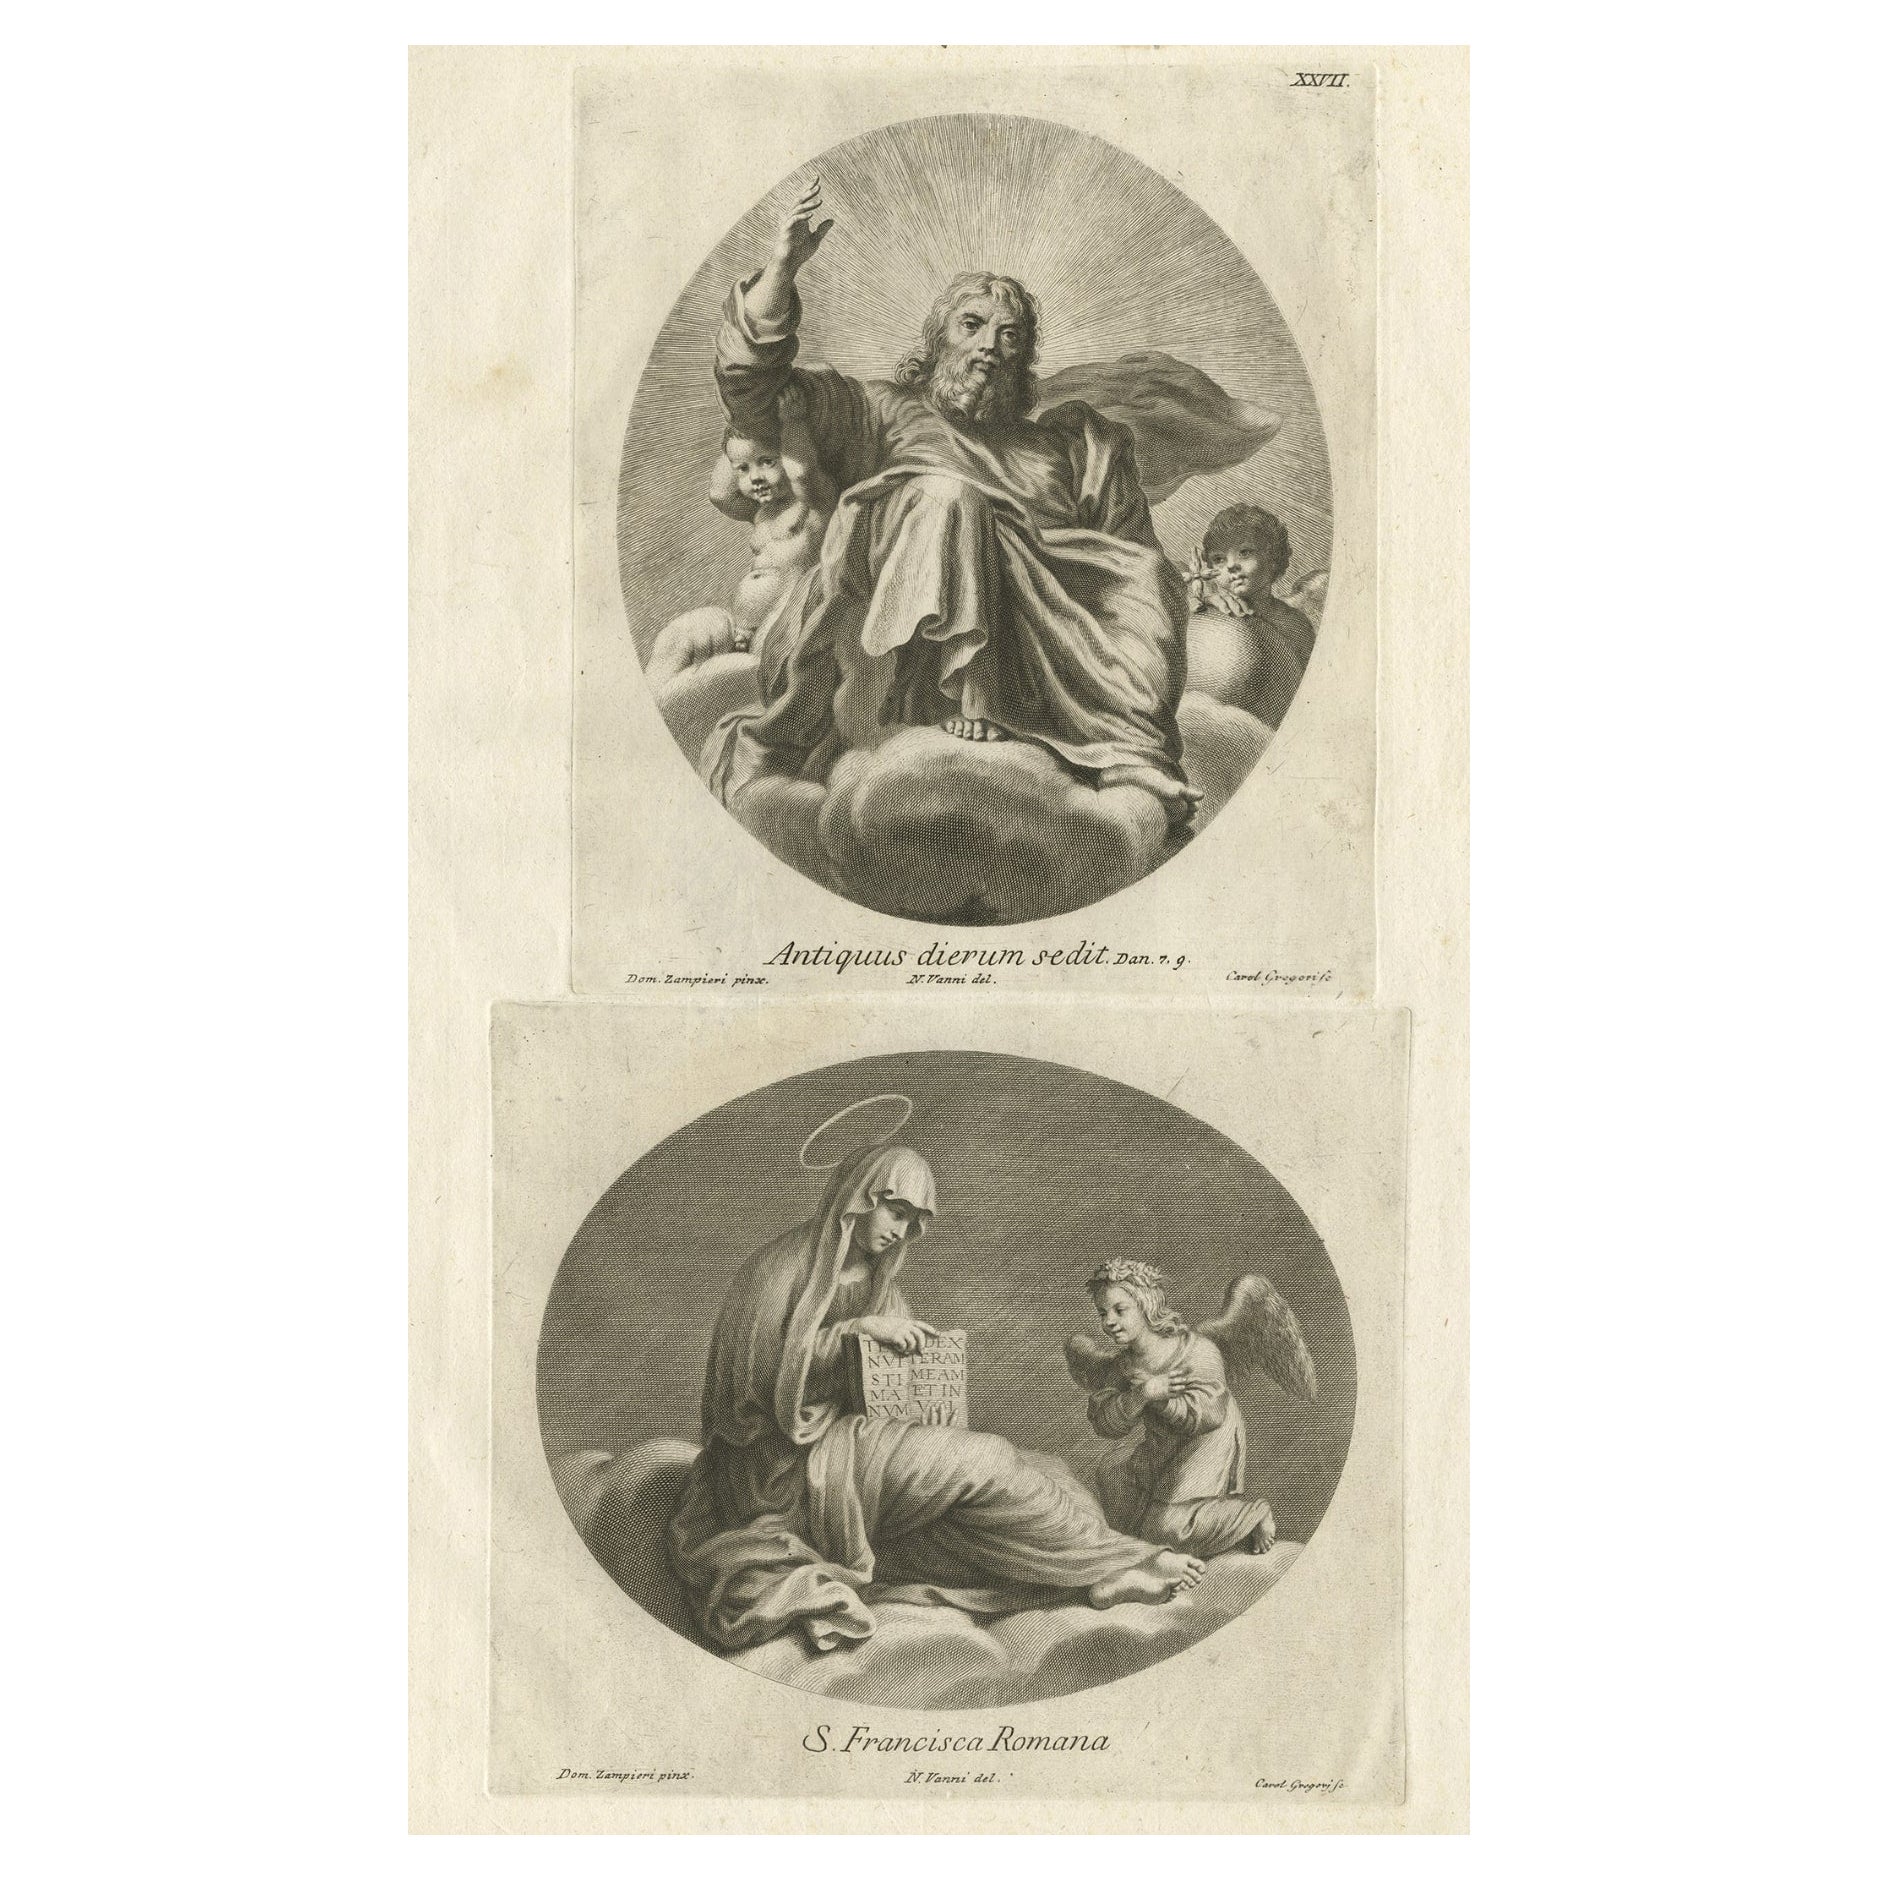 Scarce Engravings of the Ancient of Days of God from the Bible Book of Daniel For Sale